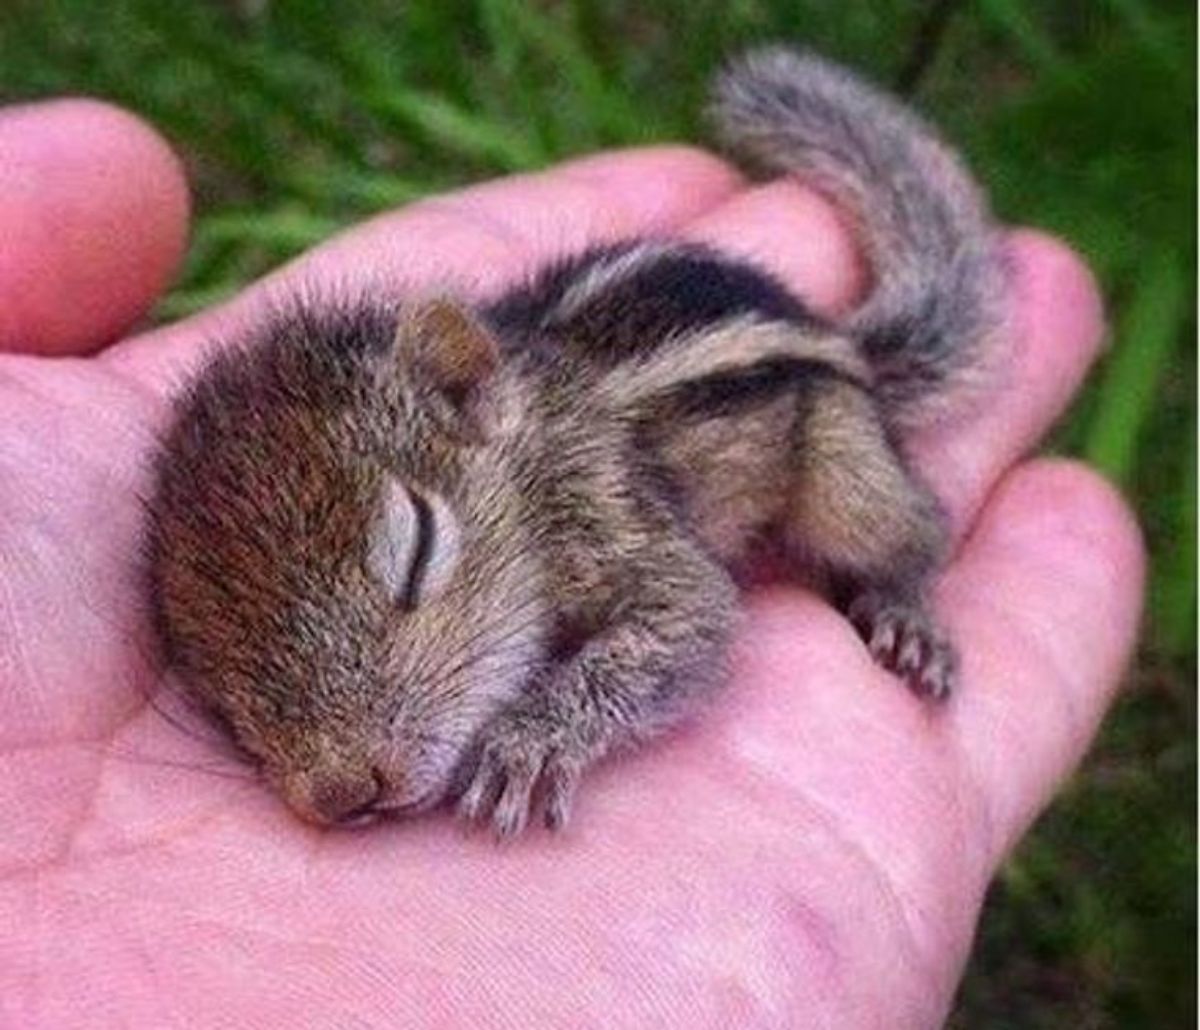 baby squirrel sleeping on someone's palm